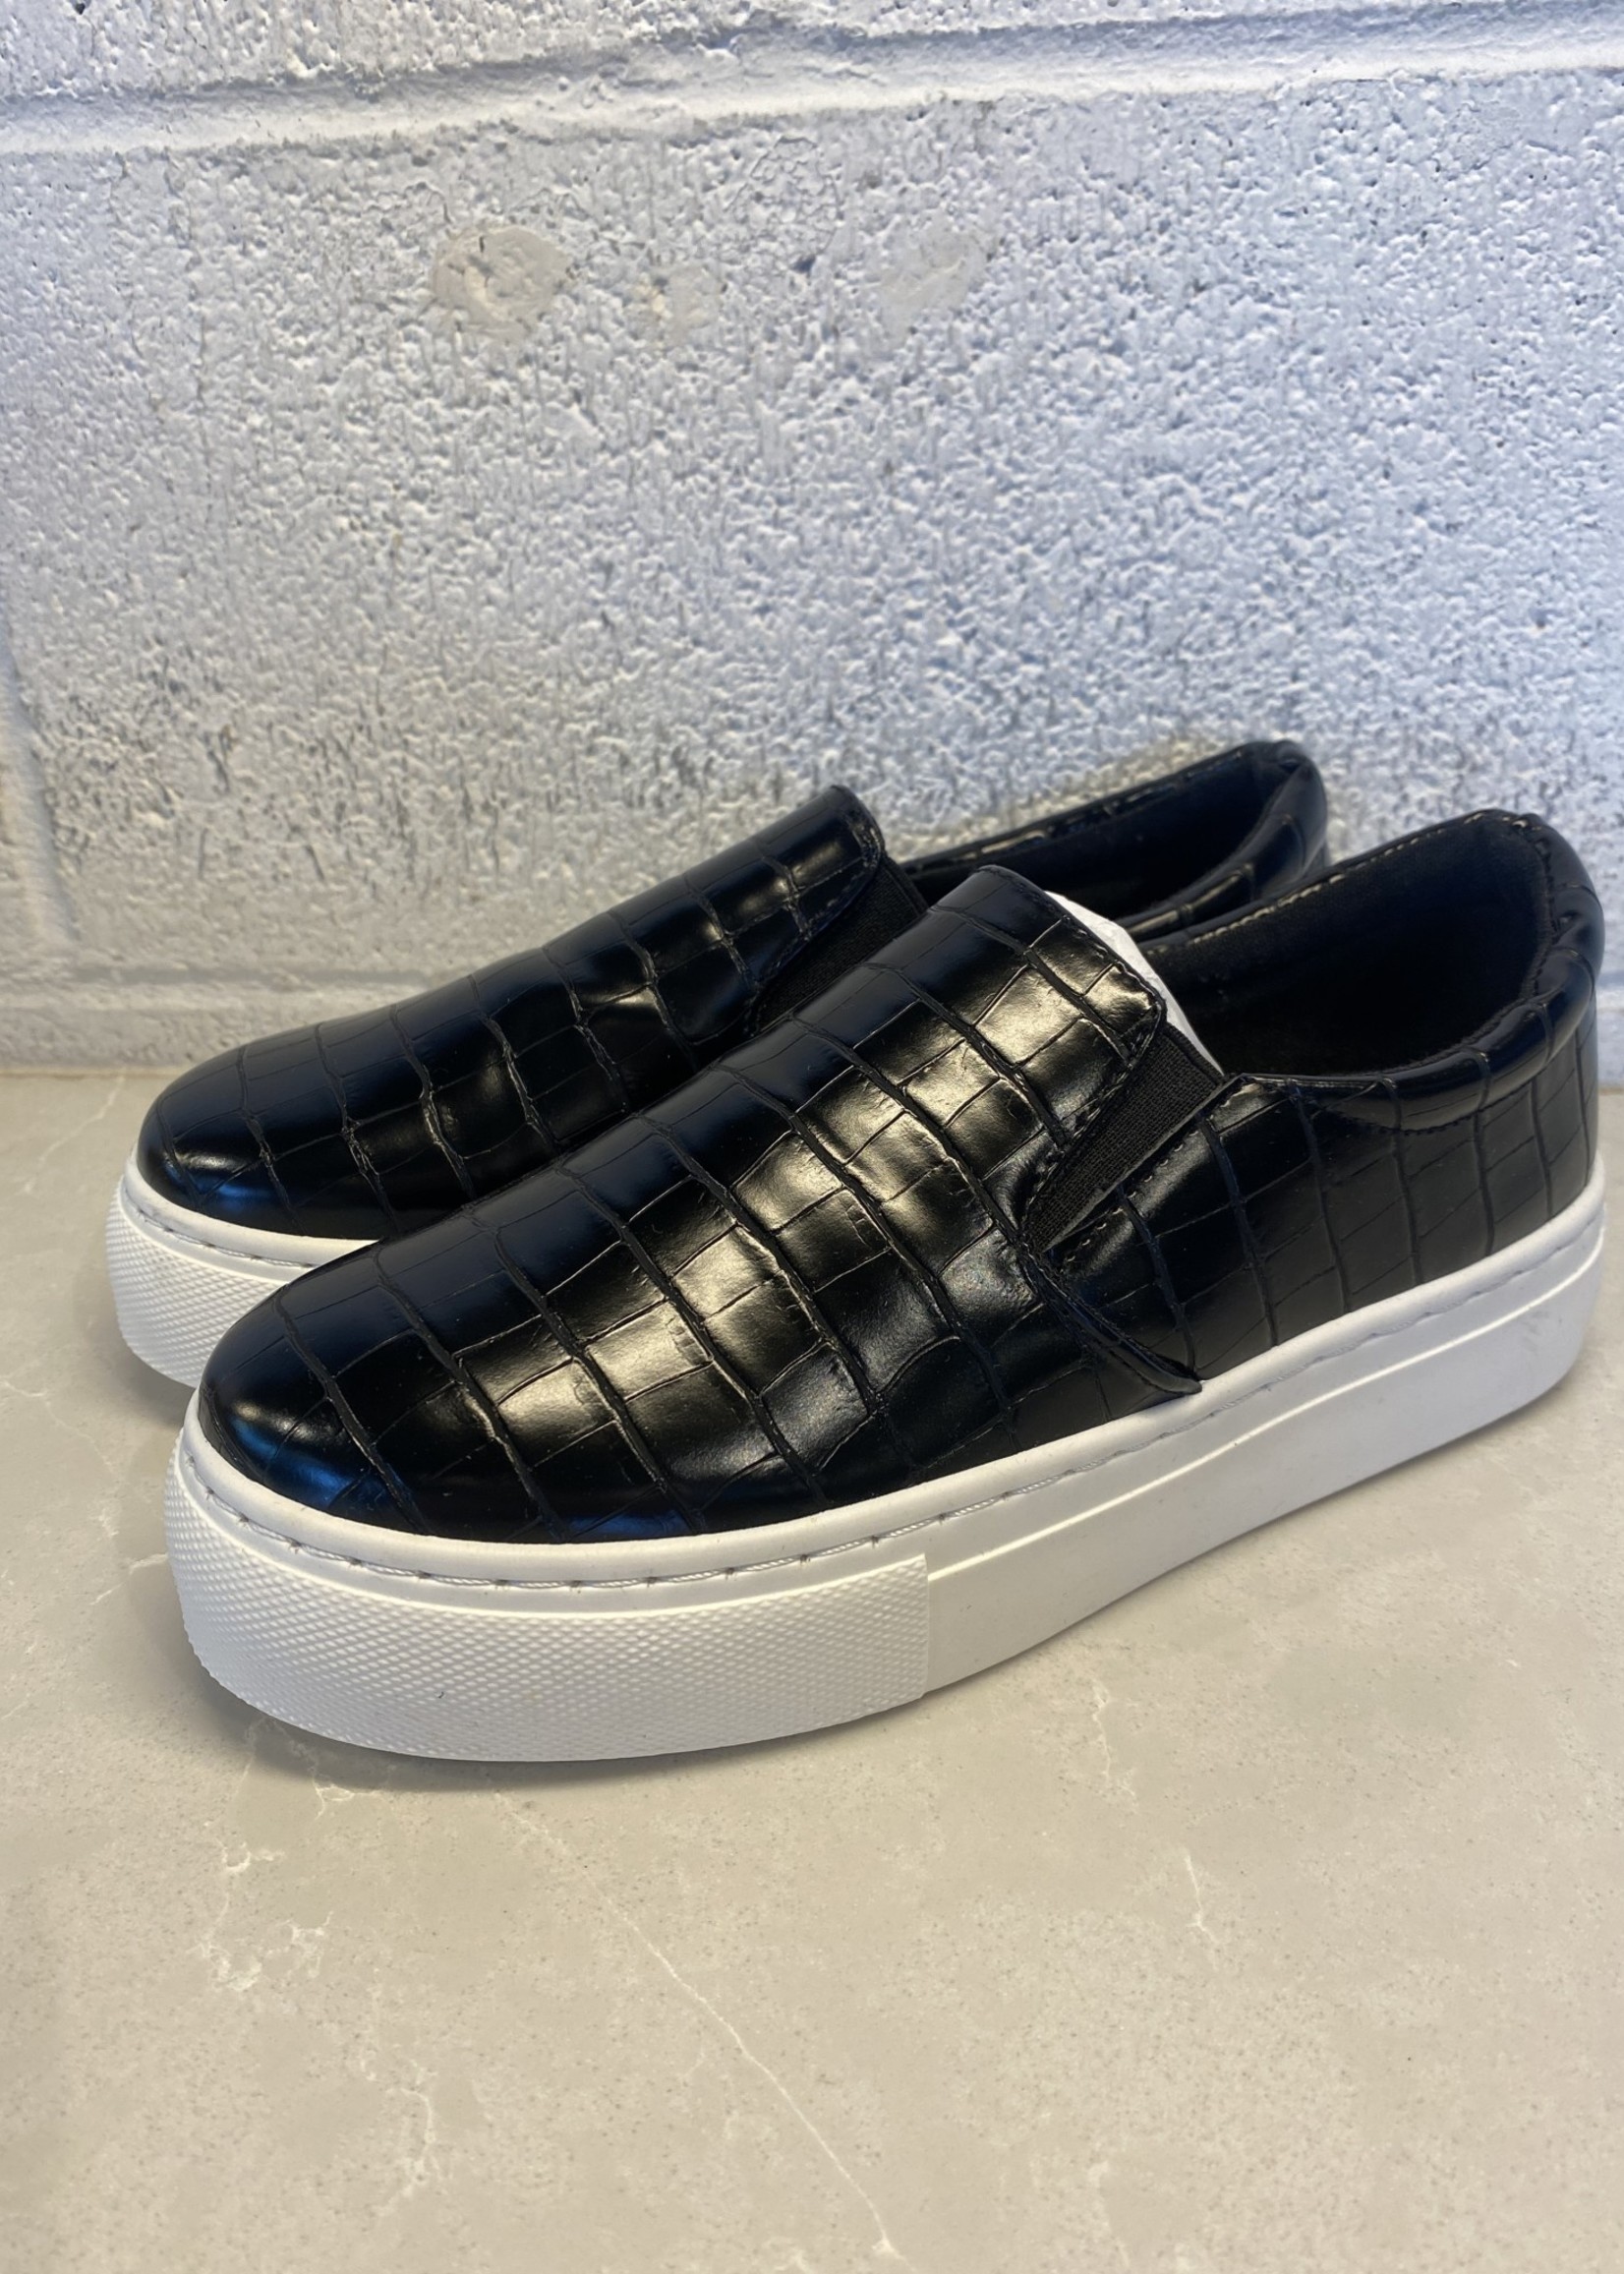 Qupid Patent Leather Shoes 6.5